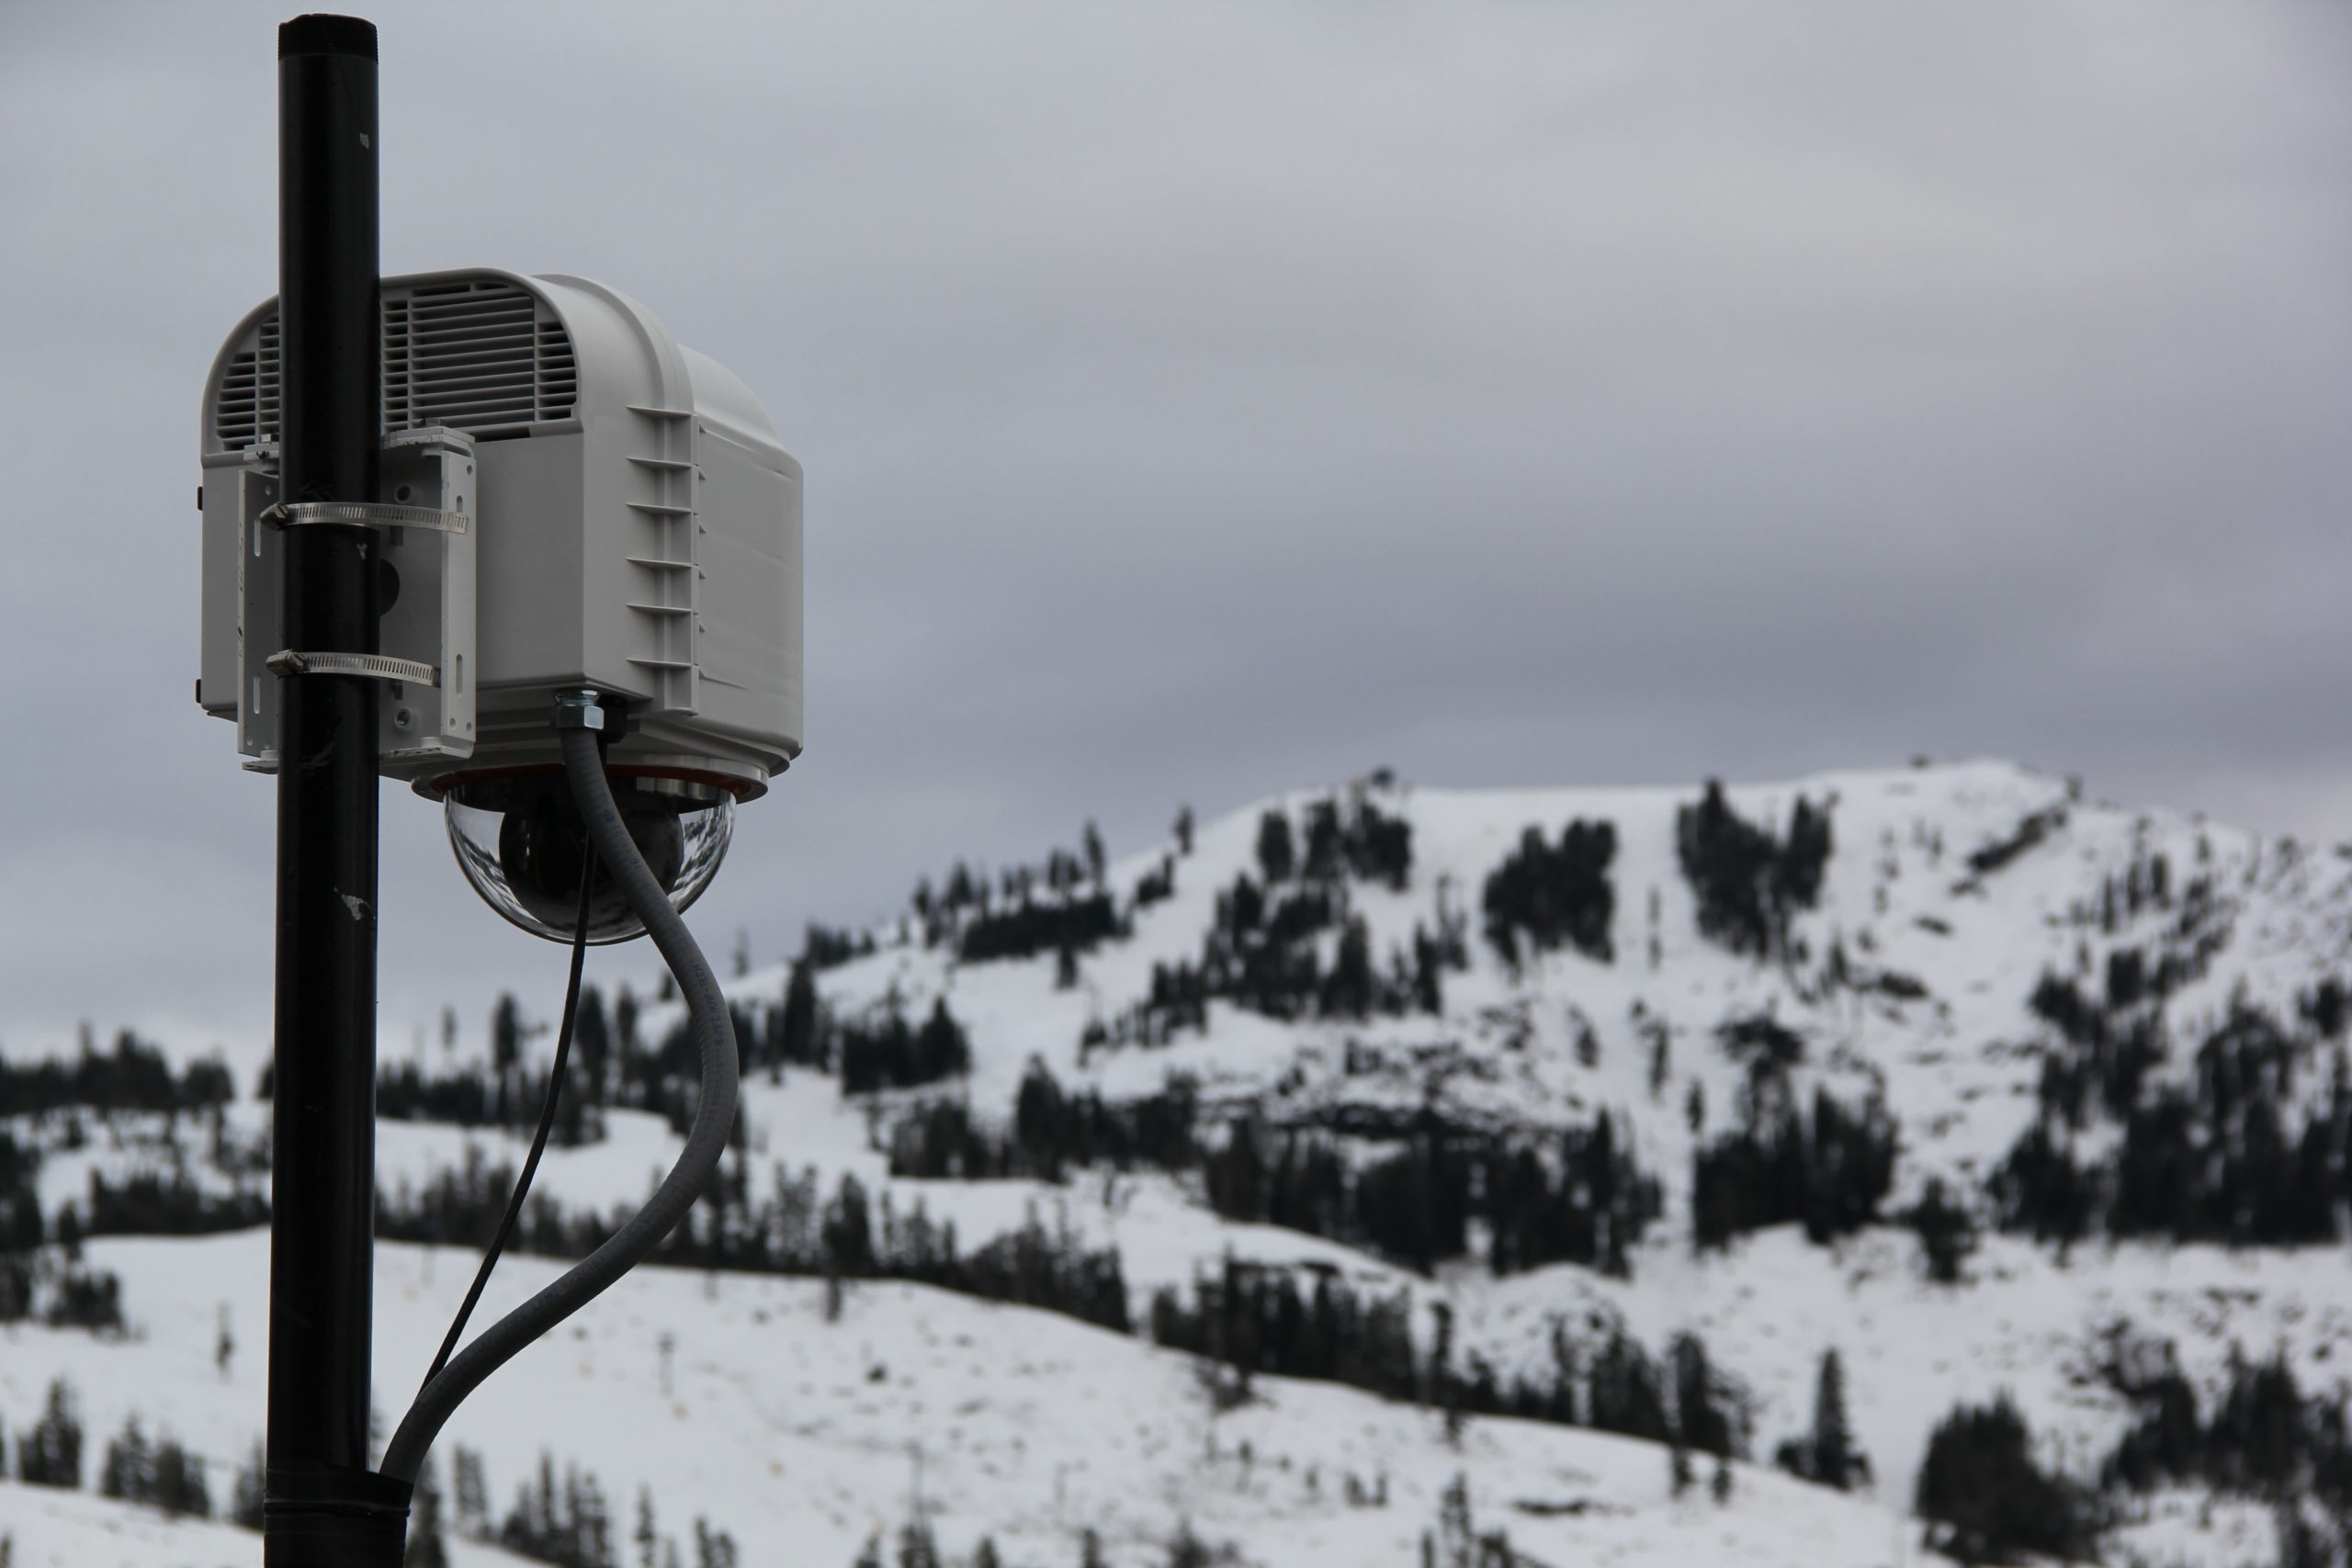 XHeat Climate Controlled PTZ Camera Enclosure System For Extreme Cold Conditions Installed At Sugar Bowl Ski Resort In Lake Tahoe California 